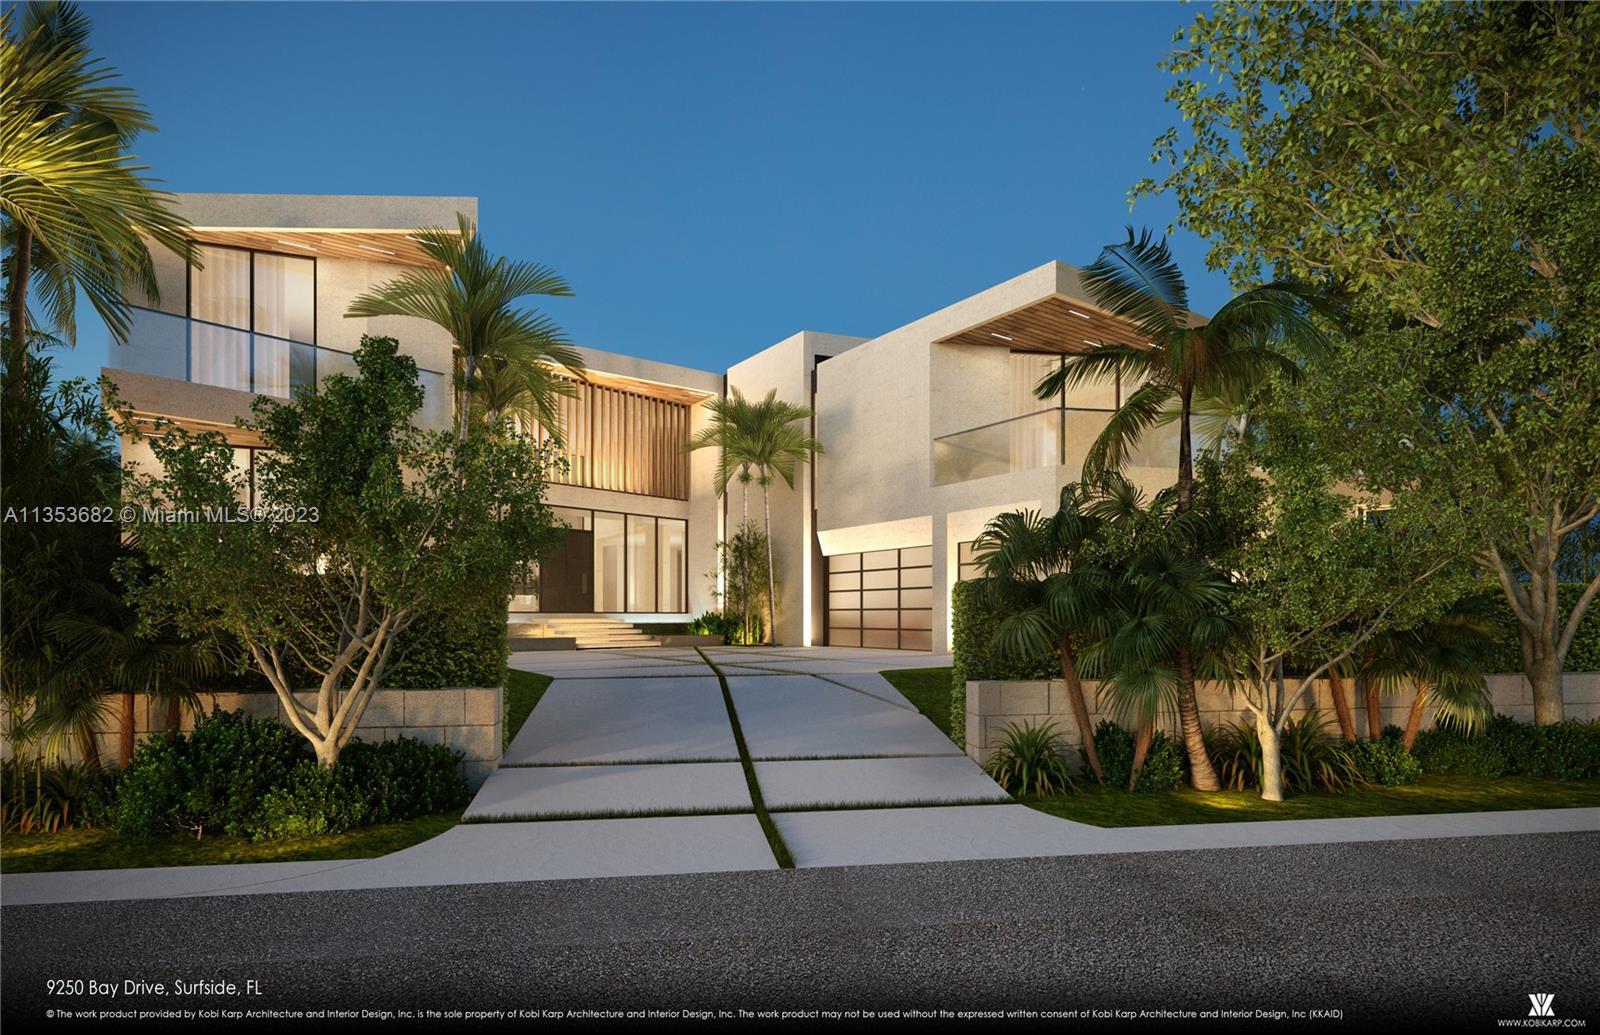 Your ultra luxury waterfront dream estate awaits on this oversized 20,000+ sqft lot, located in Surf